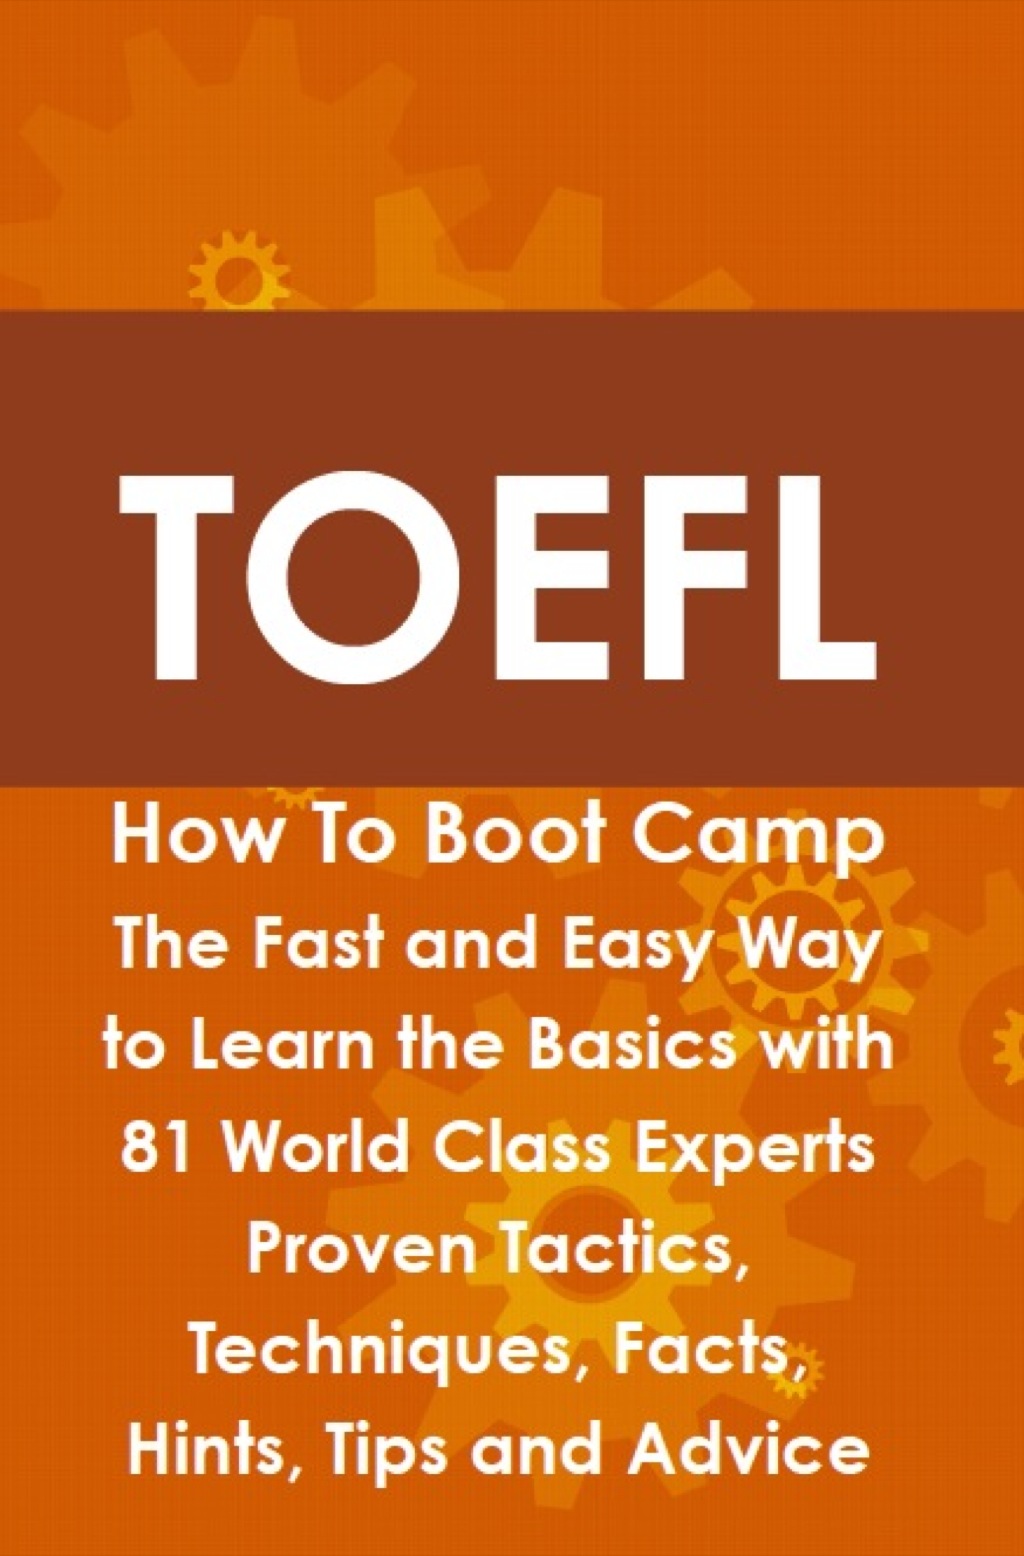 TOEFL How To Boot Camp: The Fast and Easy Way to Learn the Basics with 81 World Class Experts Proven Tactics  Techniques  (eBook) - Helen Culver,